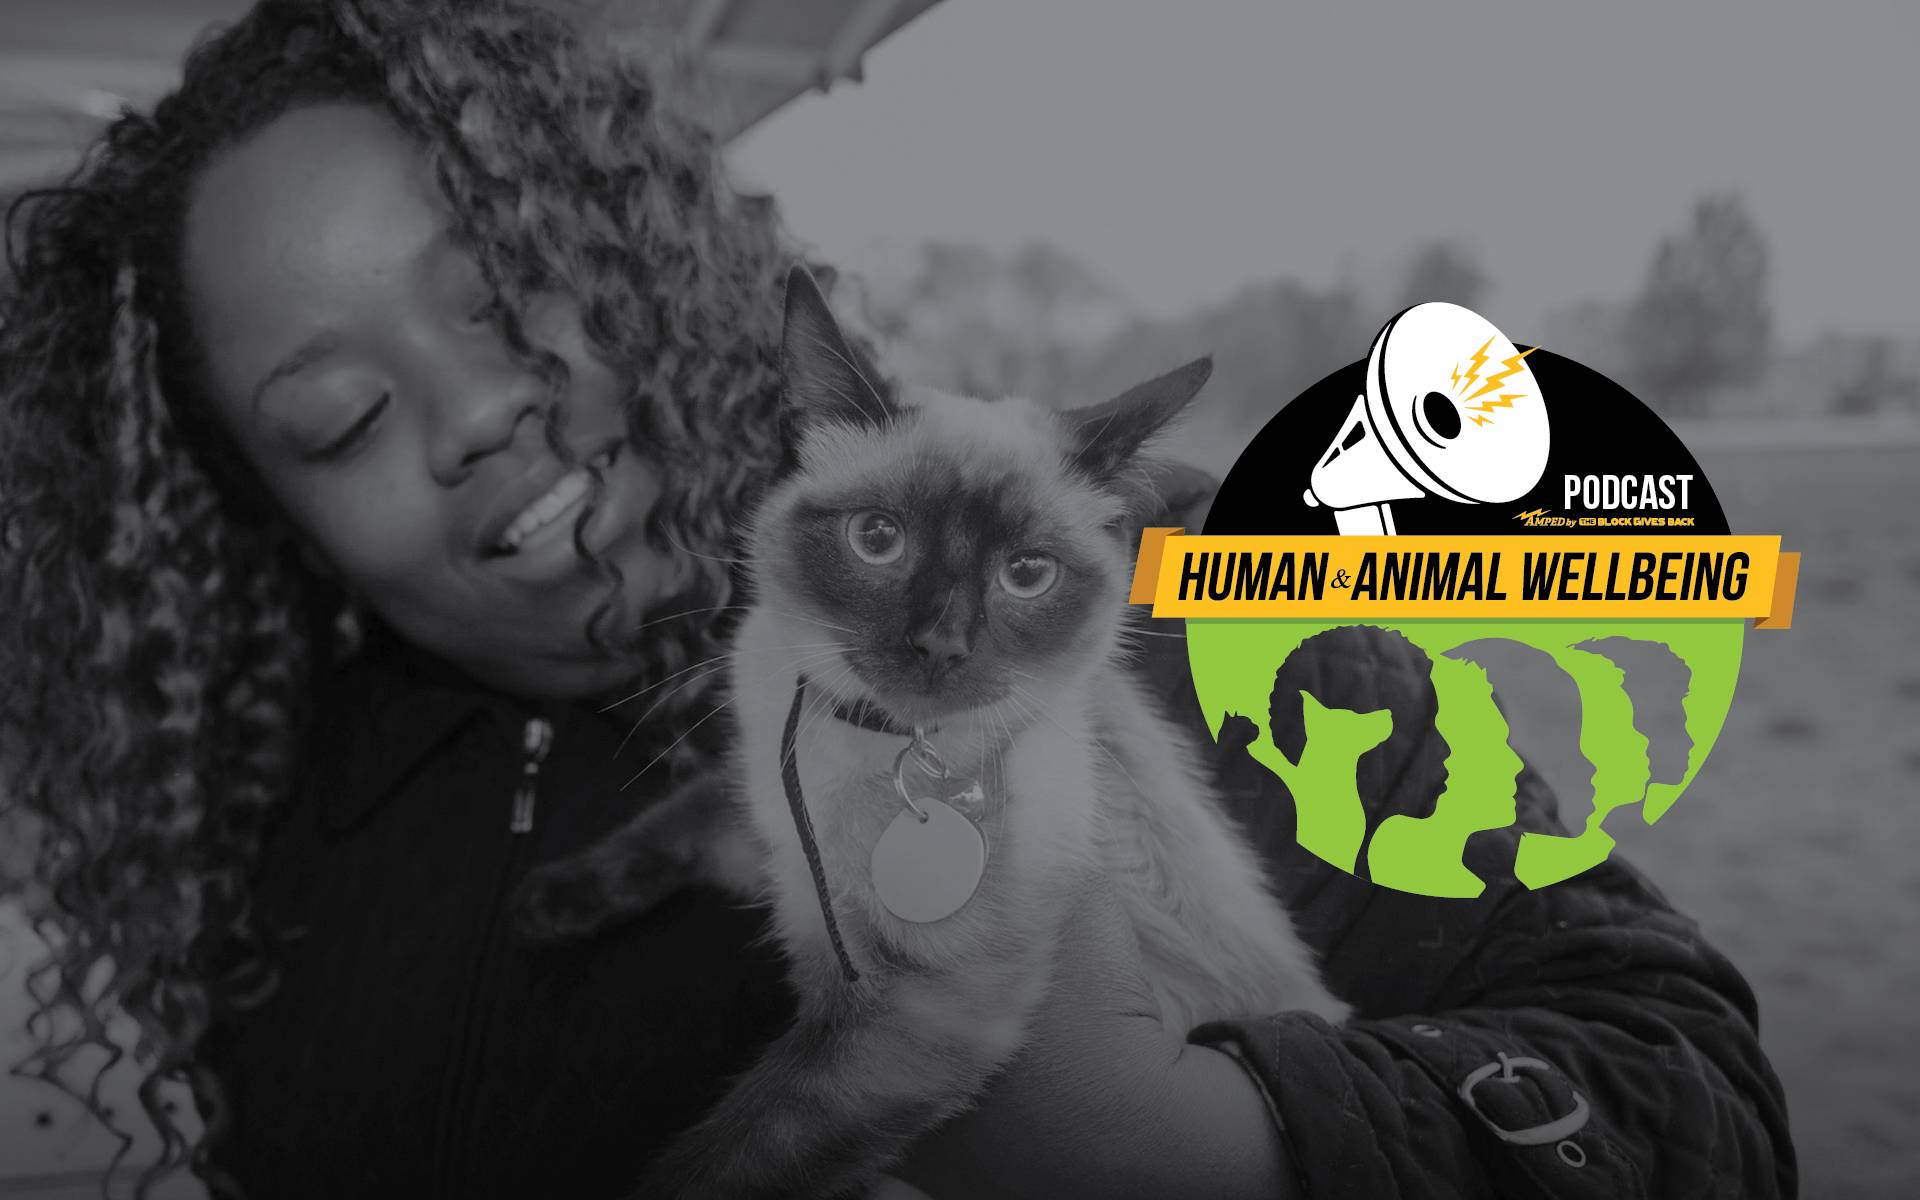 Human Animal Wellbeing Podcast